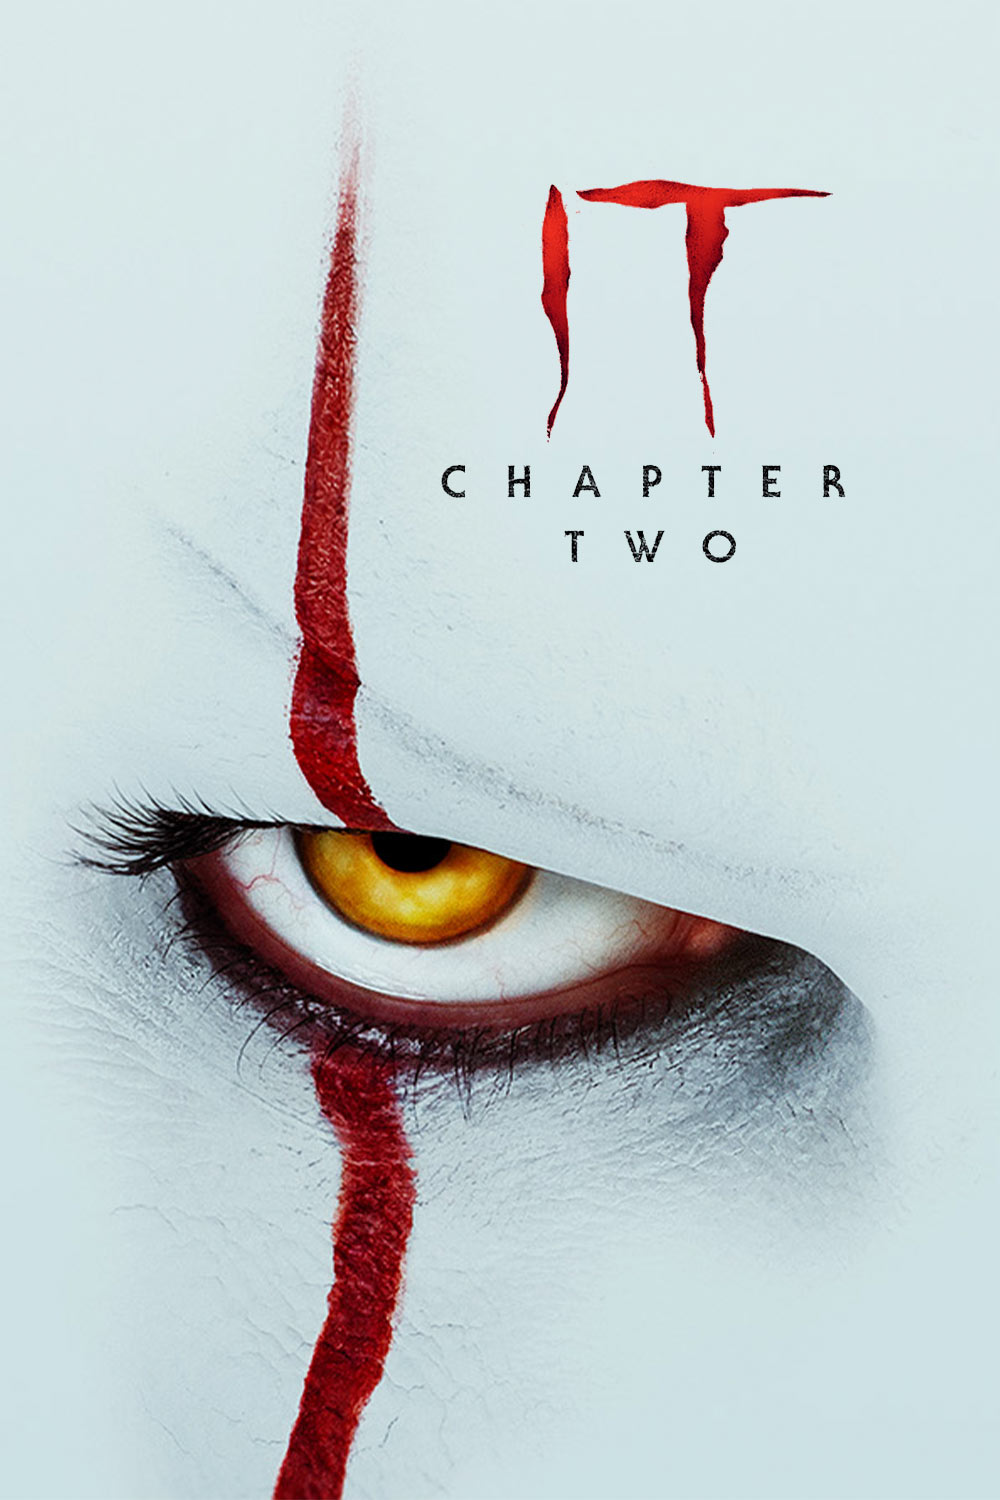 Watch IT: Chapter Two Online